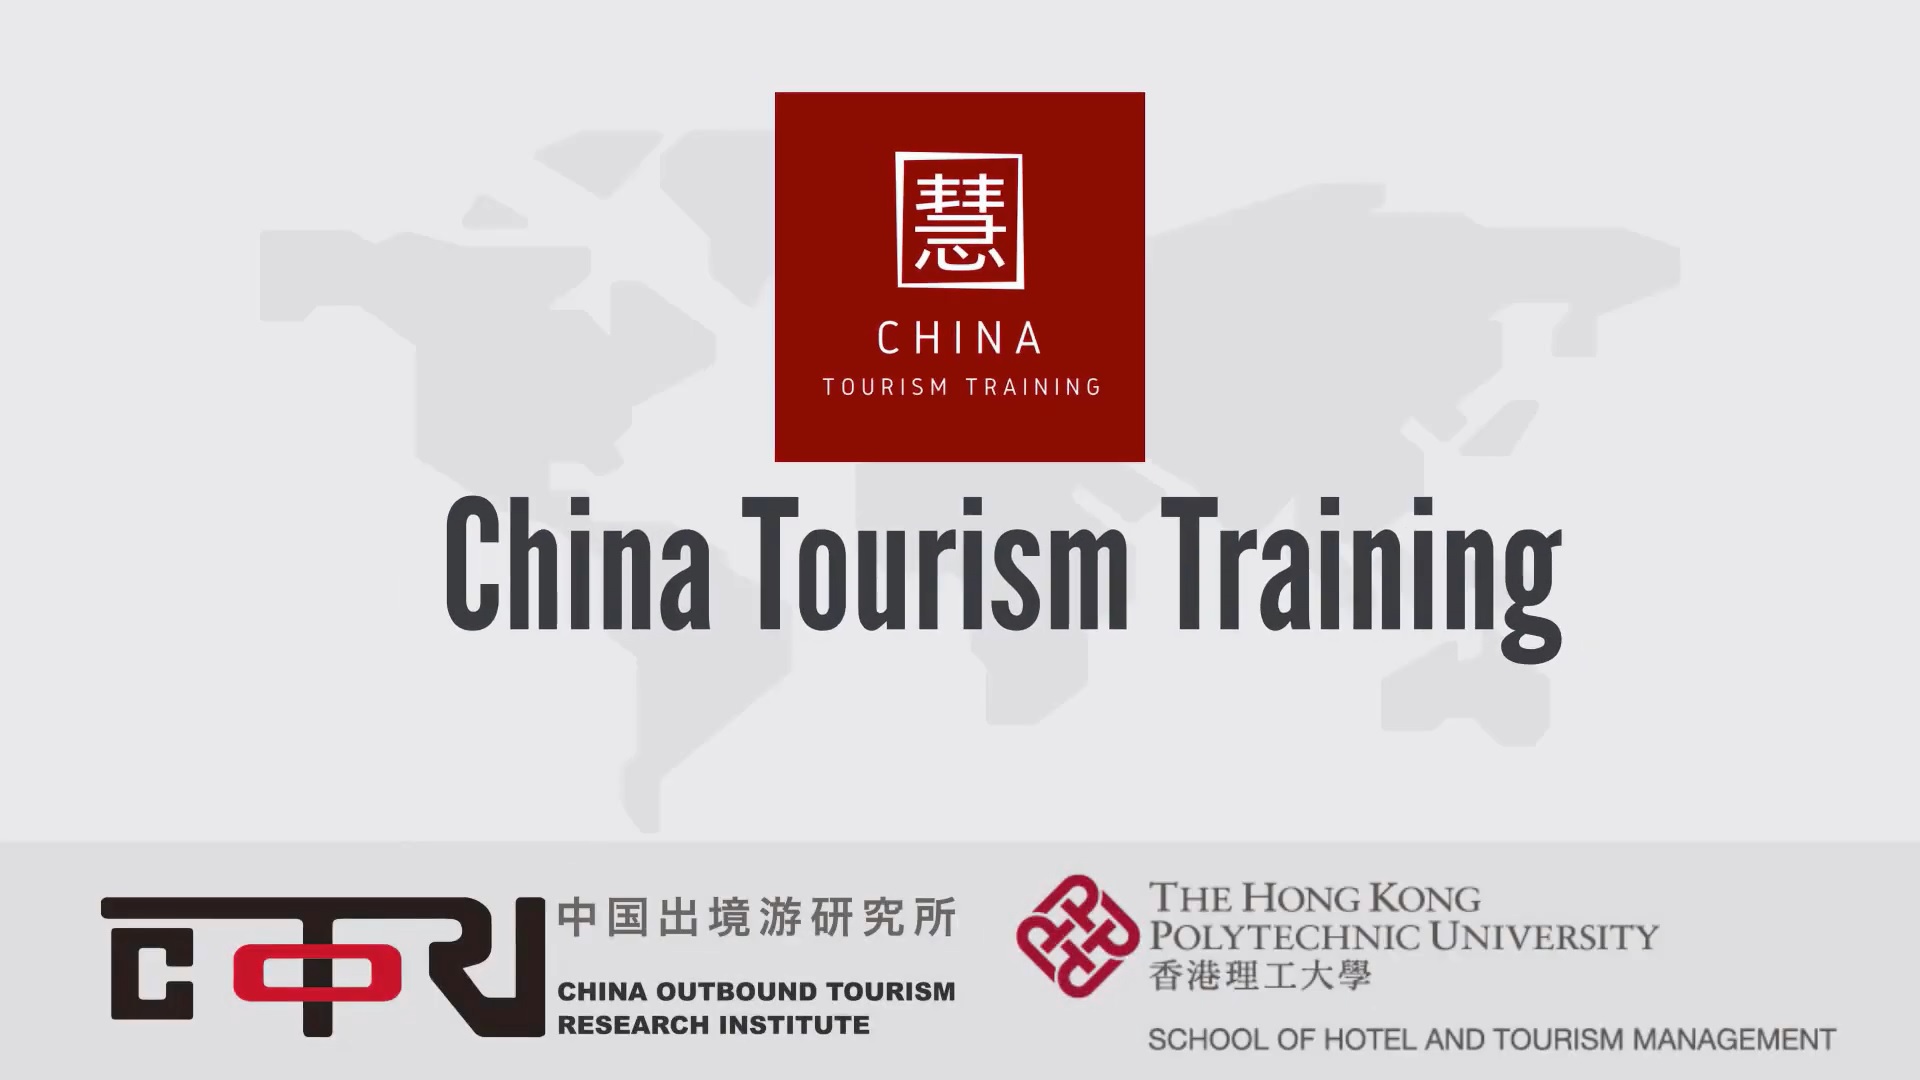 The School of Hotel and Tourism Management (SHTM) of The Hong Kong Polytechnic University (PolyU) has partnered the China Outbound Tourism Research Institute (COTRI) to offer a new online training programme – the China Tourism Training (CTT). Aiming to become the Global Standard training in Chinese outbound tourism market, the CTT will offer five different tracks for tourism service providers. Click to enlarge.